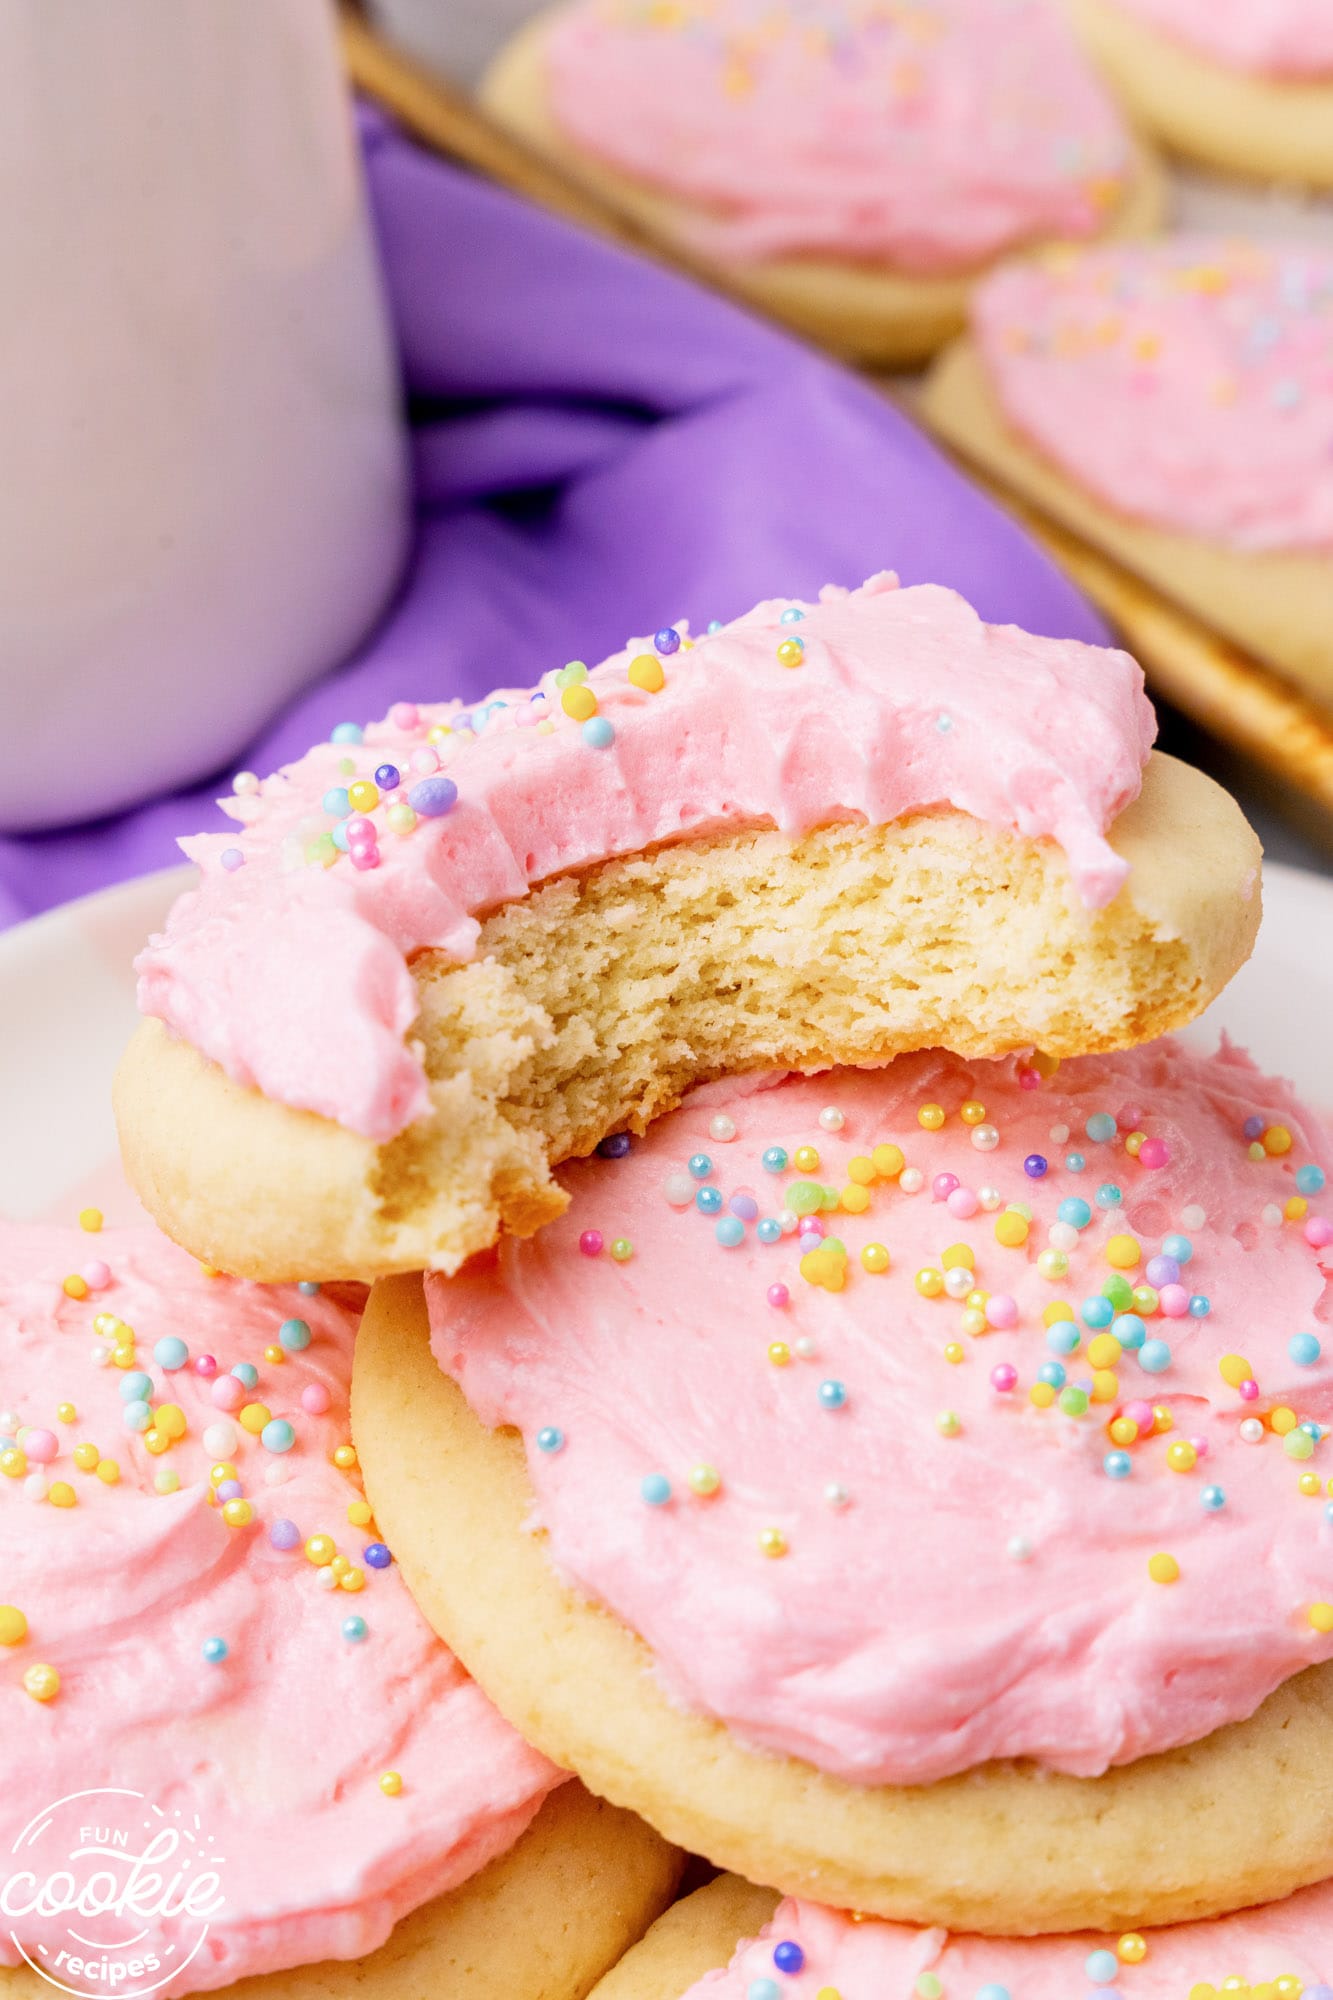 a plate of cookies with pink frosting. One has had a bite taken, to show the interior soft texture.